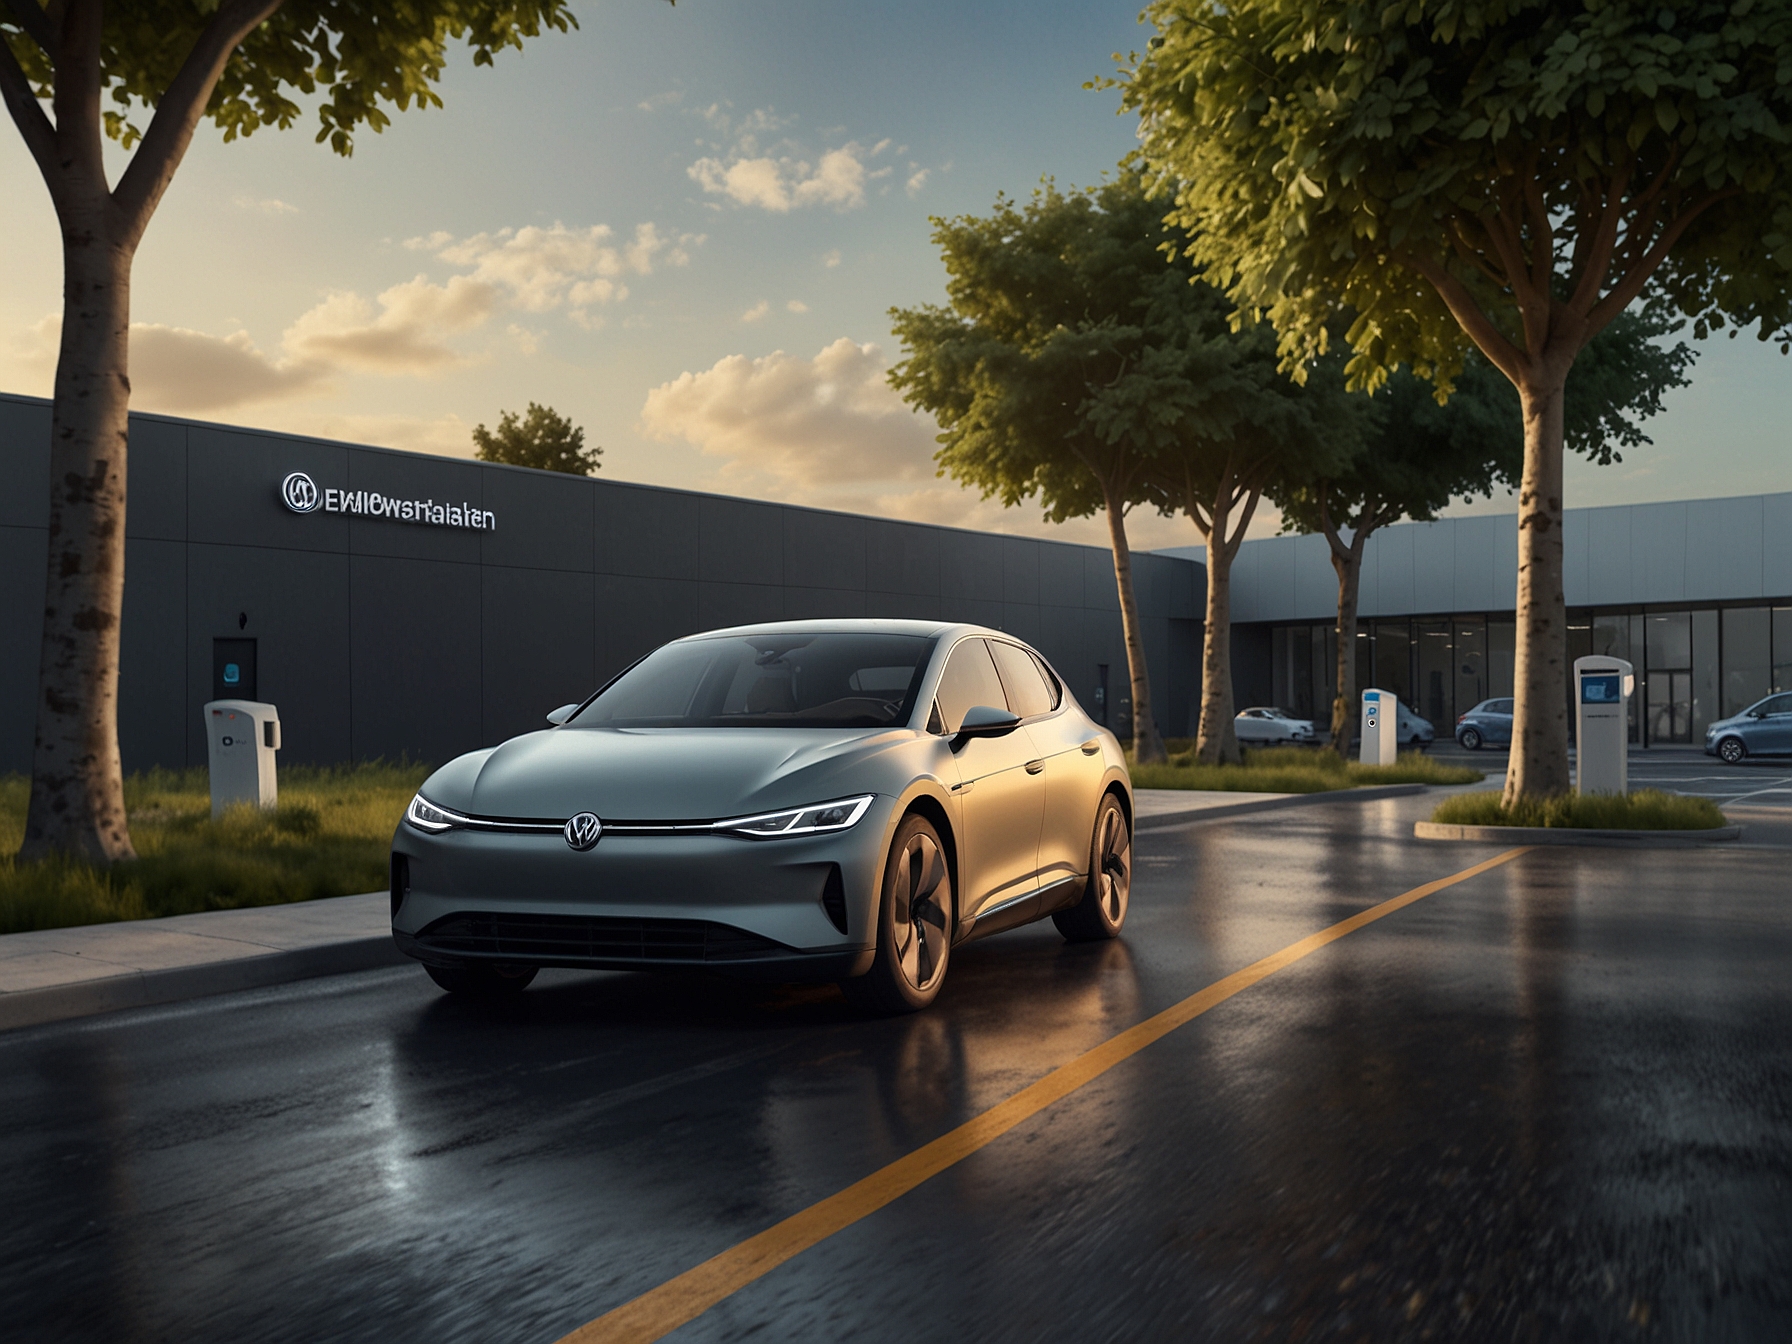 An illustration of Volkswagen's innovative electric vehicles, ID.3 and ID.4, highlighting advanced technology, sustainable production, and the company's commitment to an environmentally friendly future.